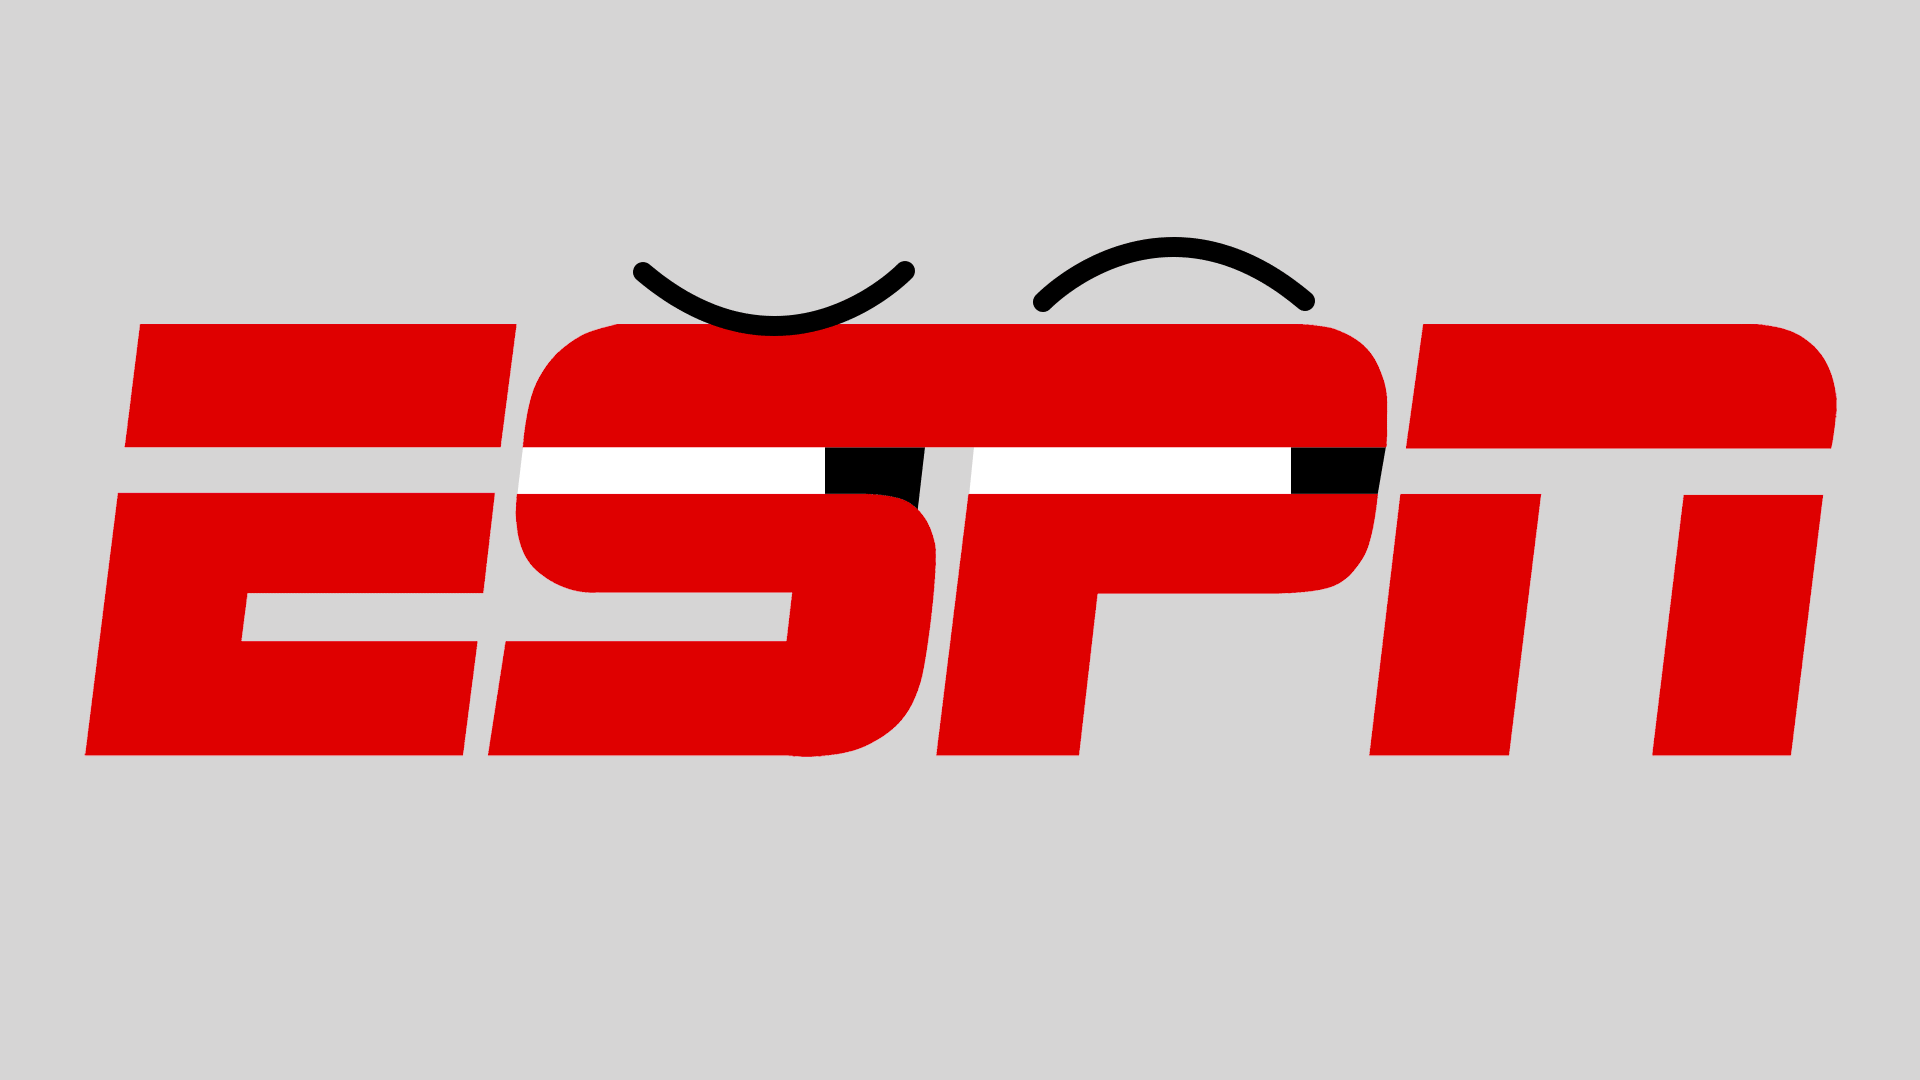 Illustration of the ESPN logo with eyes in the S and P shifting from side to side as an eyebrow raises